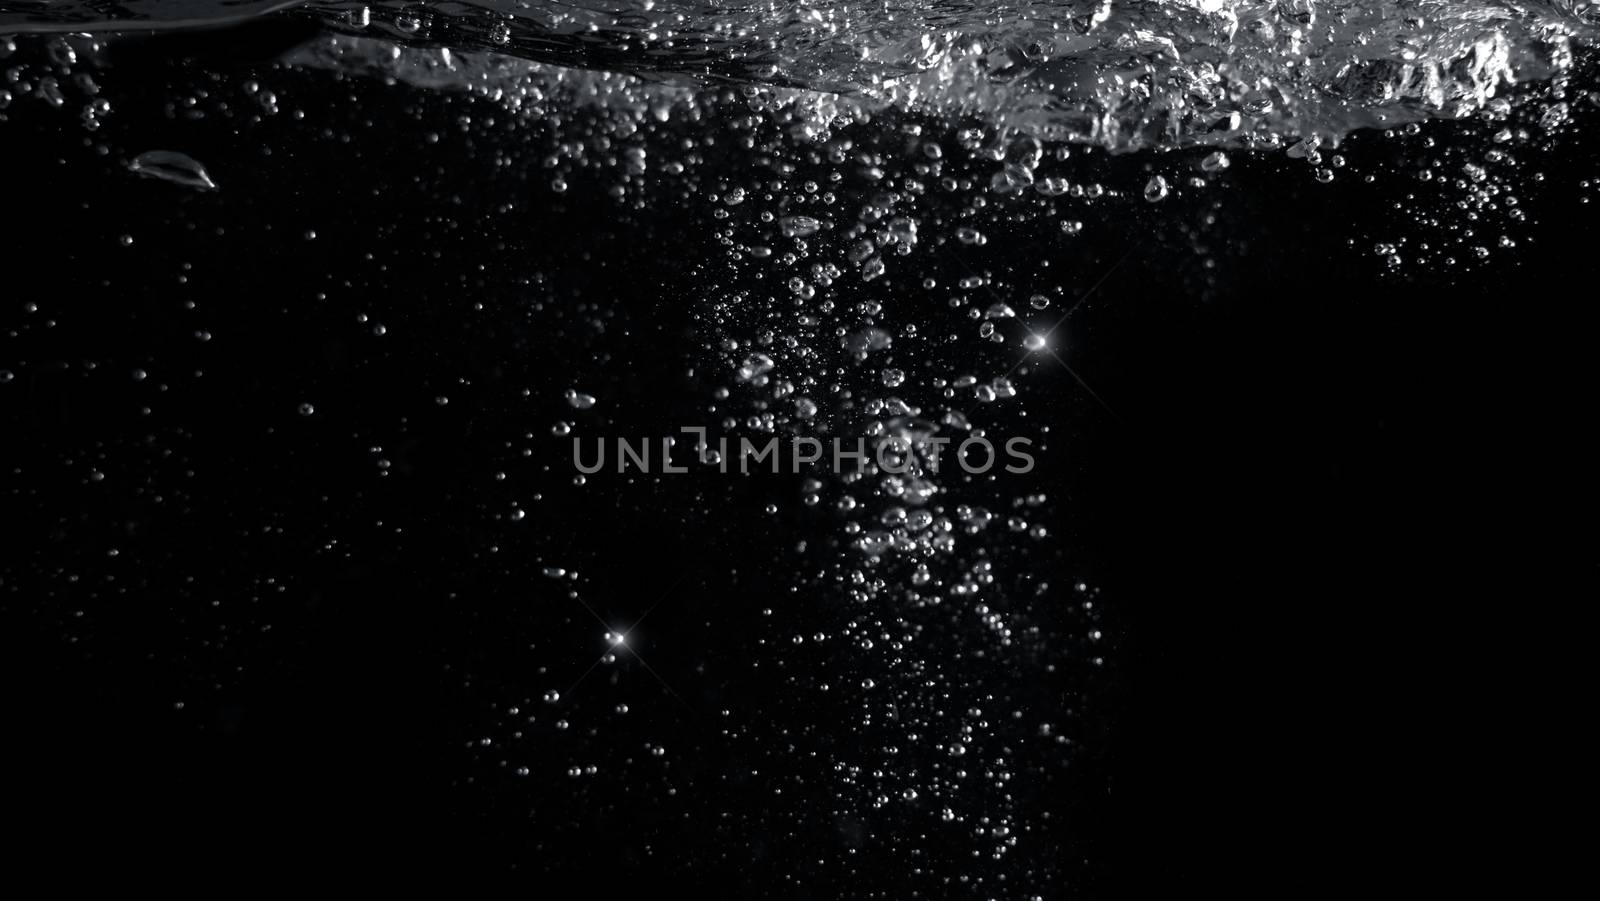 Blurred images of close-up soda bubbles fizzing up by gnepphoto